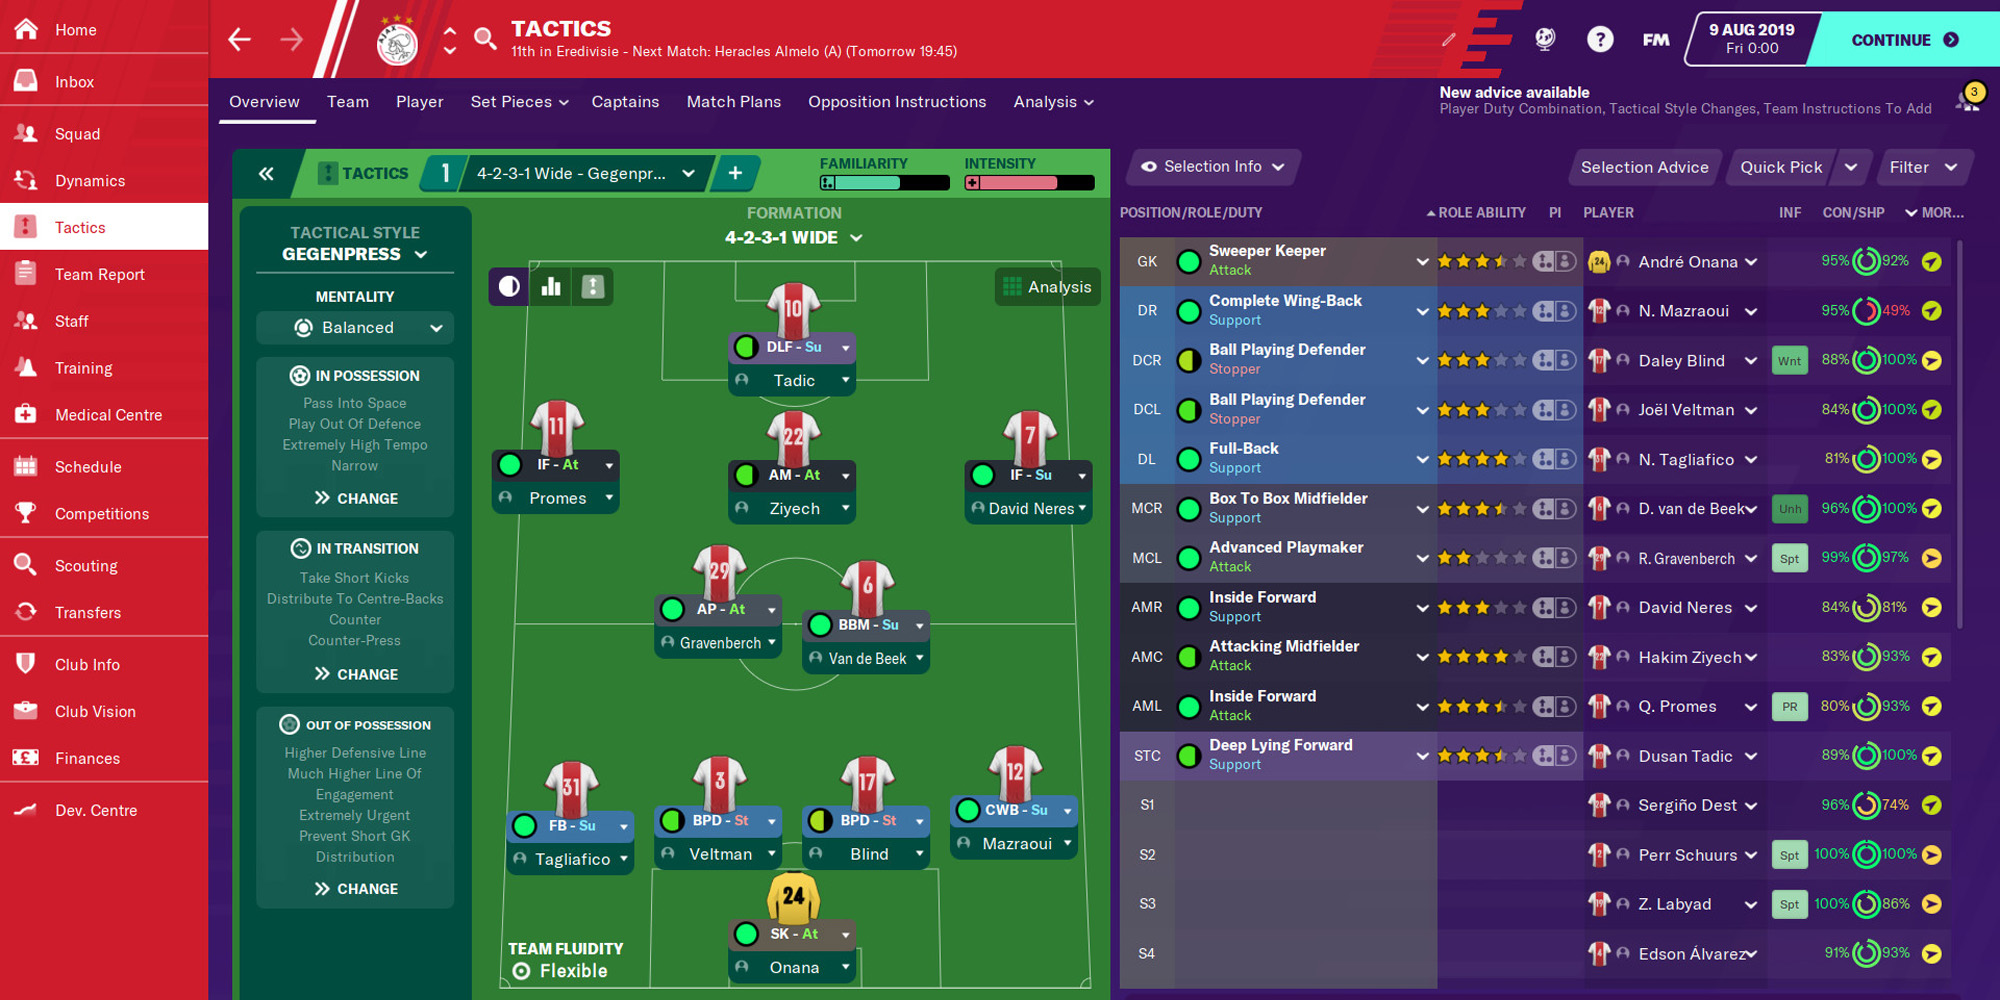 football manager 2021 xbox review